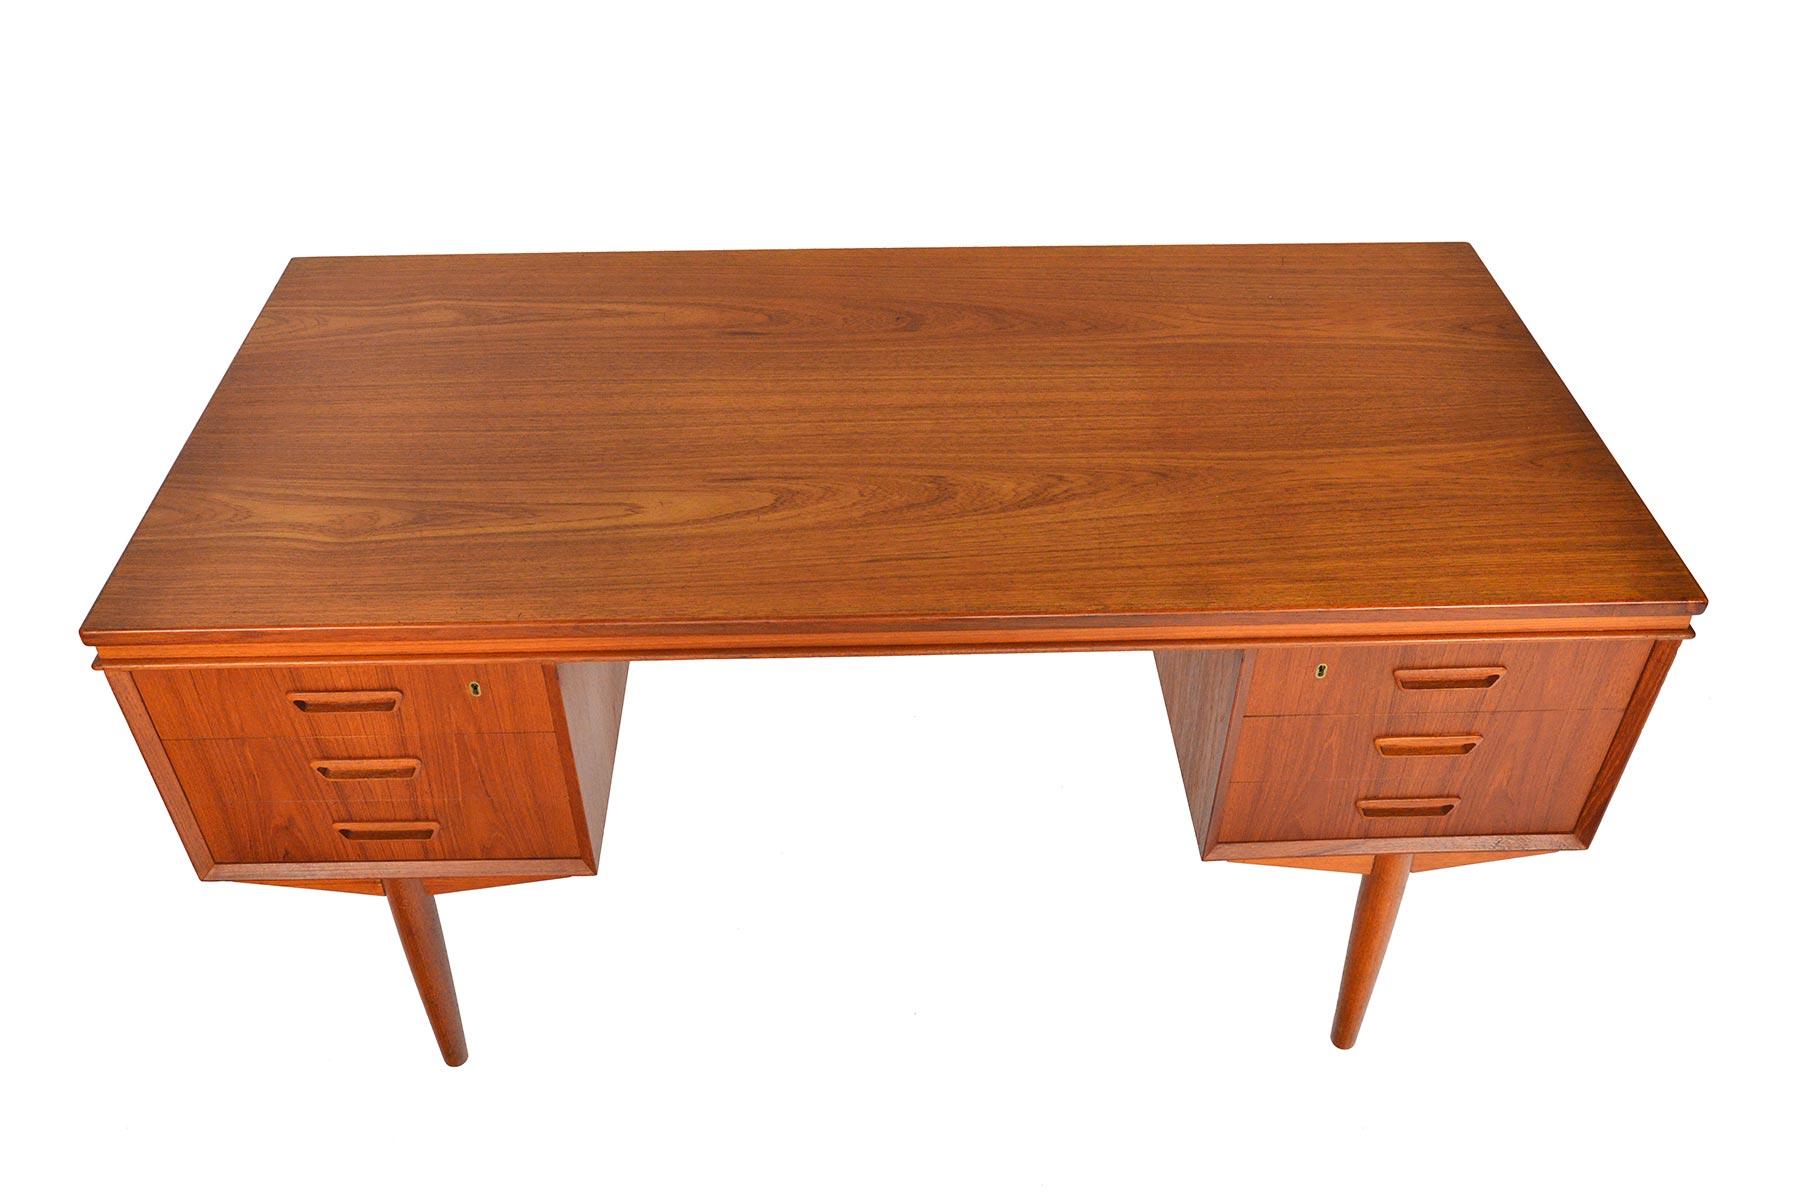 This Danish modern teak executive desk provides a wide work surface supported by two banks of drawers standing on spindle legs. Each drawer is adorned with a carved trapezoid pull. The back features divided bookshelf storage. This desk offers a tall